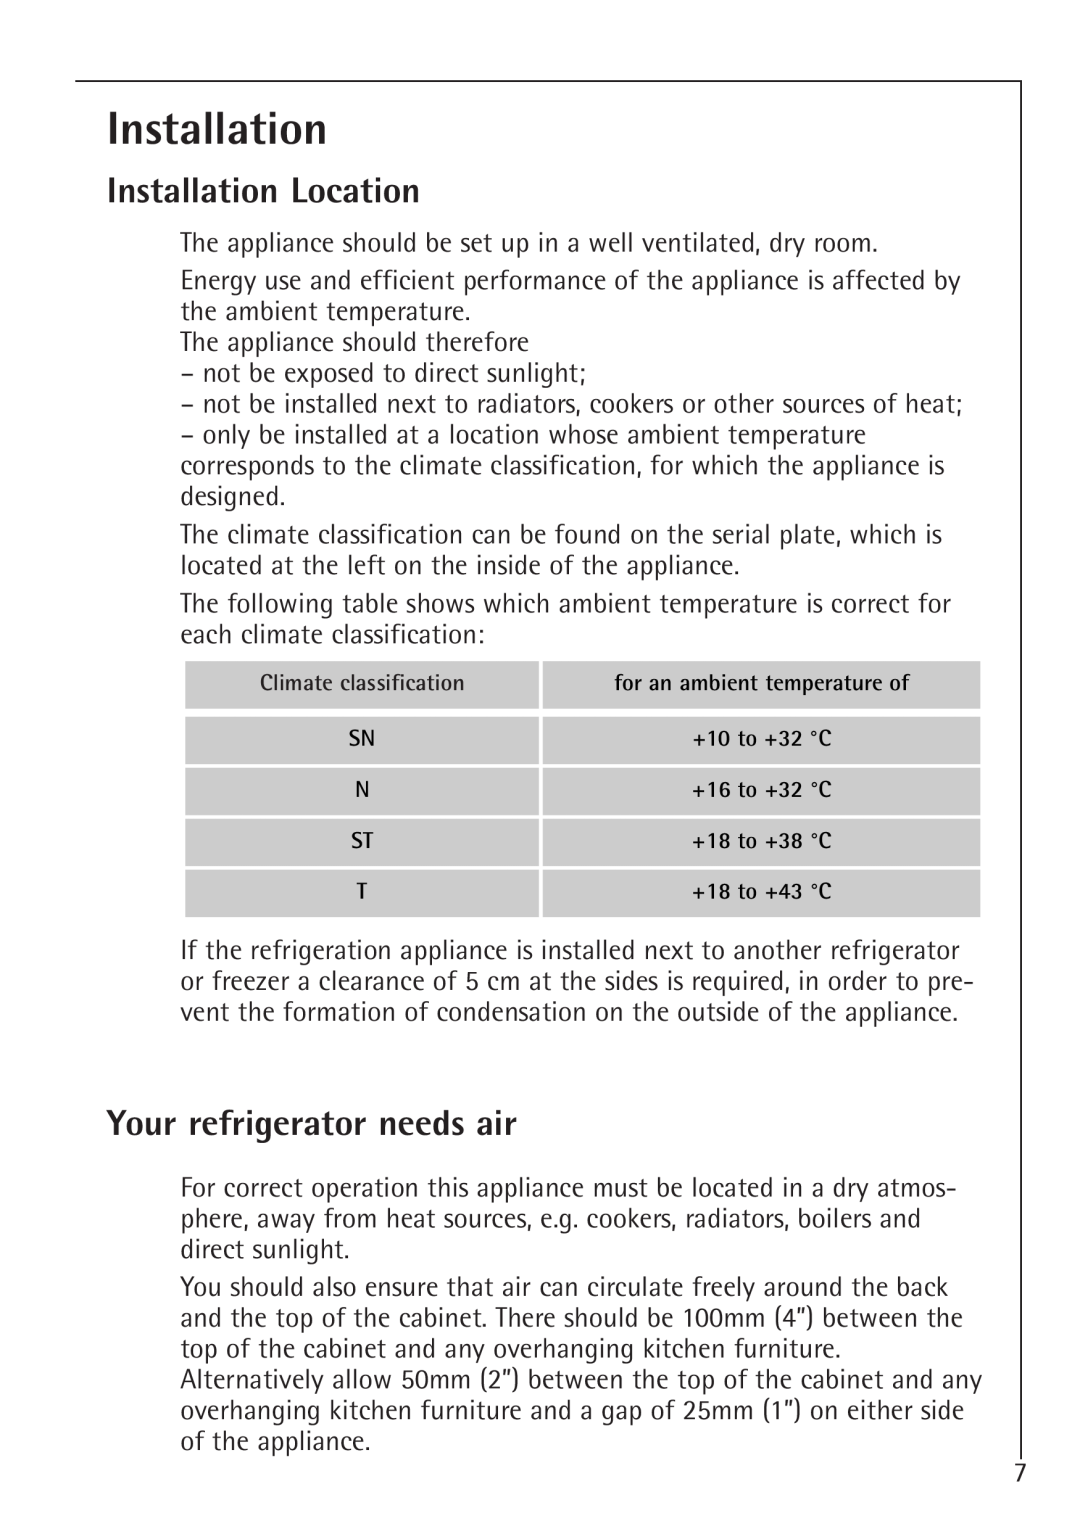 Electrolux 1583-8 TK operating instructions Installation Location, Your refrigerator needs air 